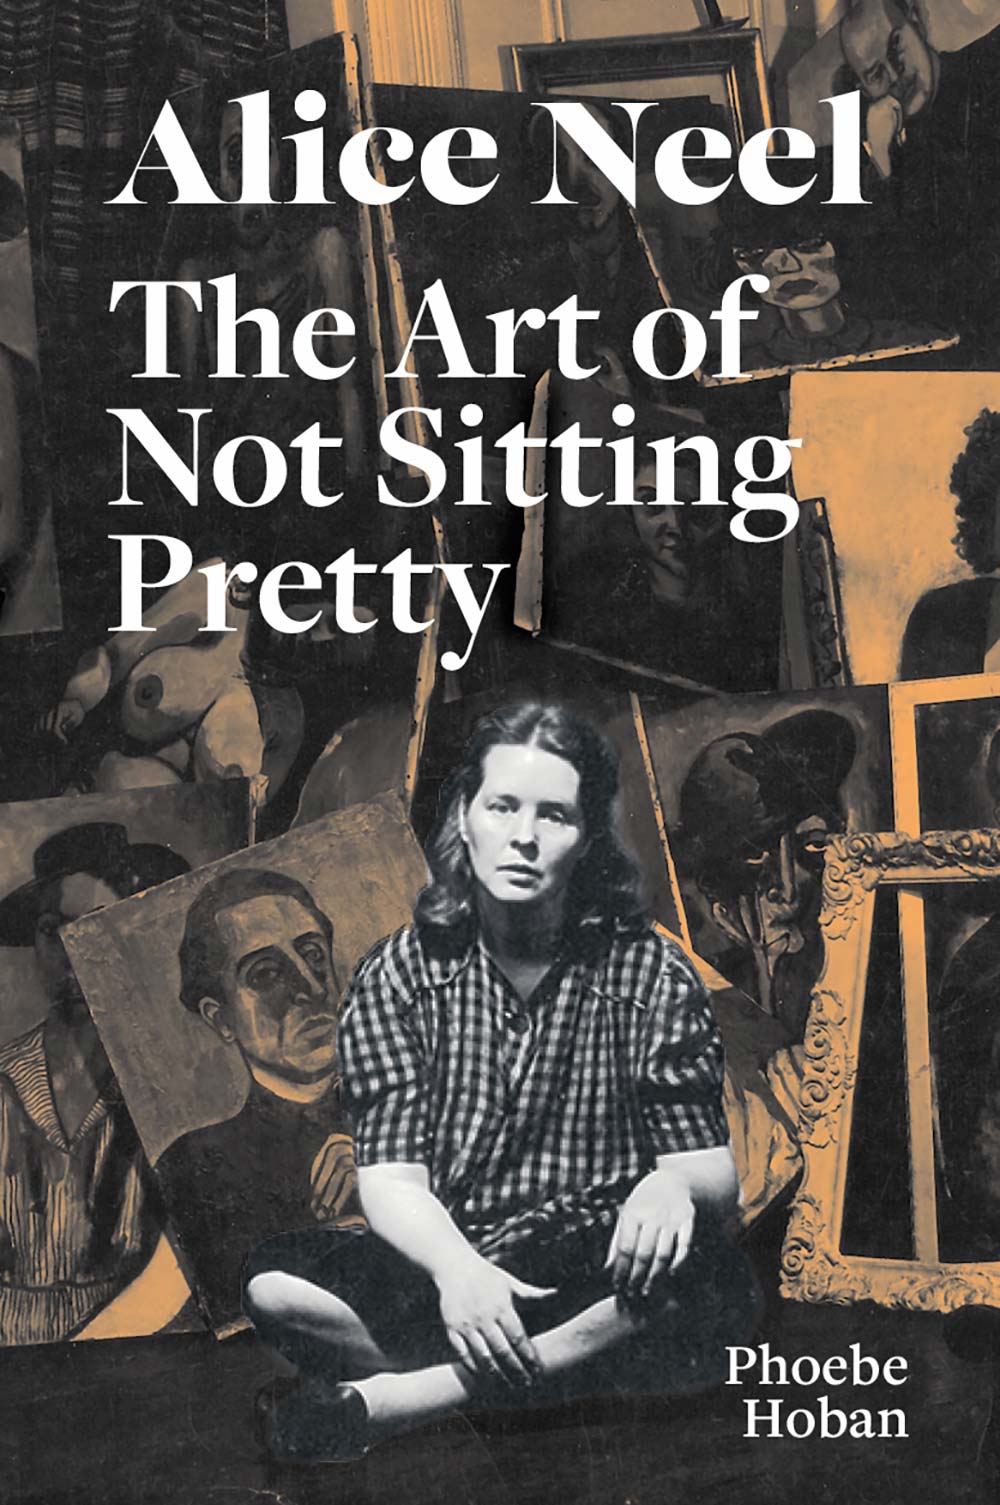 Cover of a book titled Alice Neel: The Art of Not Sitting Pretty, published by David Zwirner Books in 2021.